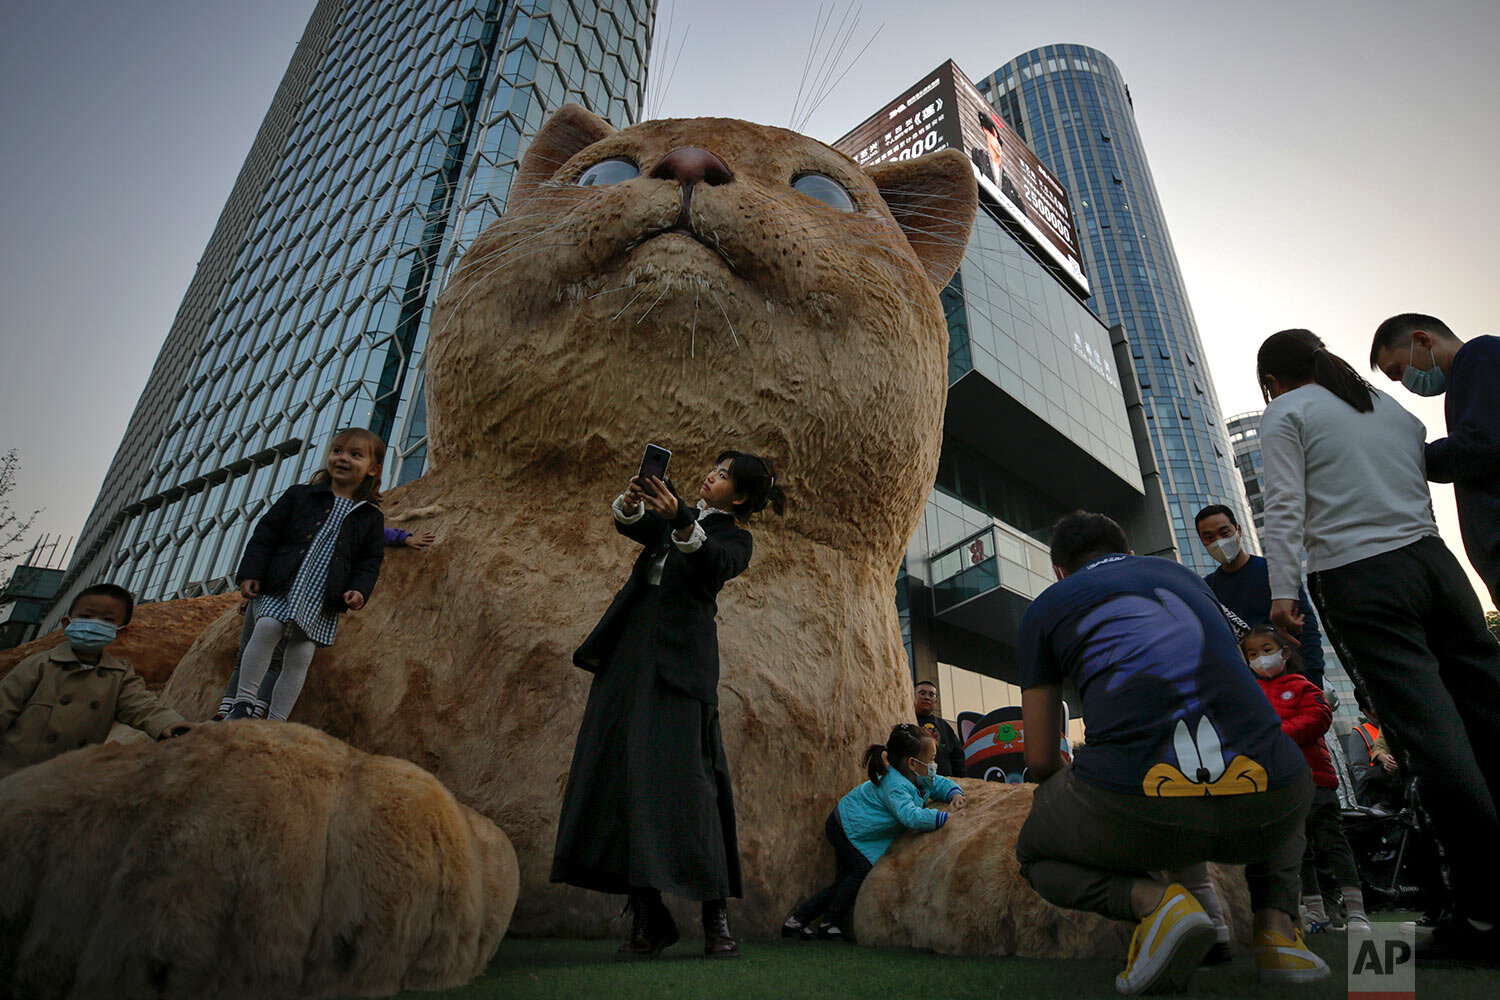  A woman takes a selfie as visitors wearing face masks to help curb the spread of the coronavirus gather near a giant cat structure on display at a commercial office building in Beijing, Sunday, Oct. 18, 2020. (AP Photo/Andy Wong) 